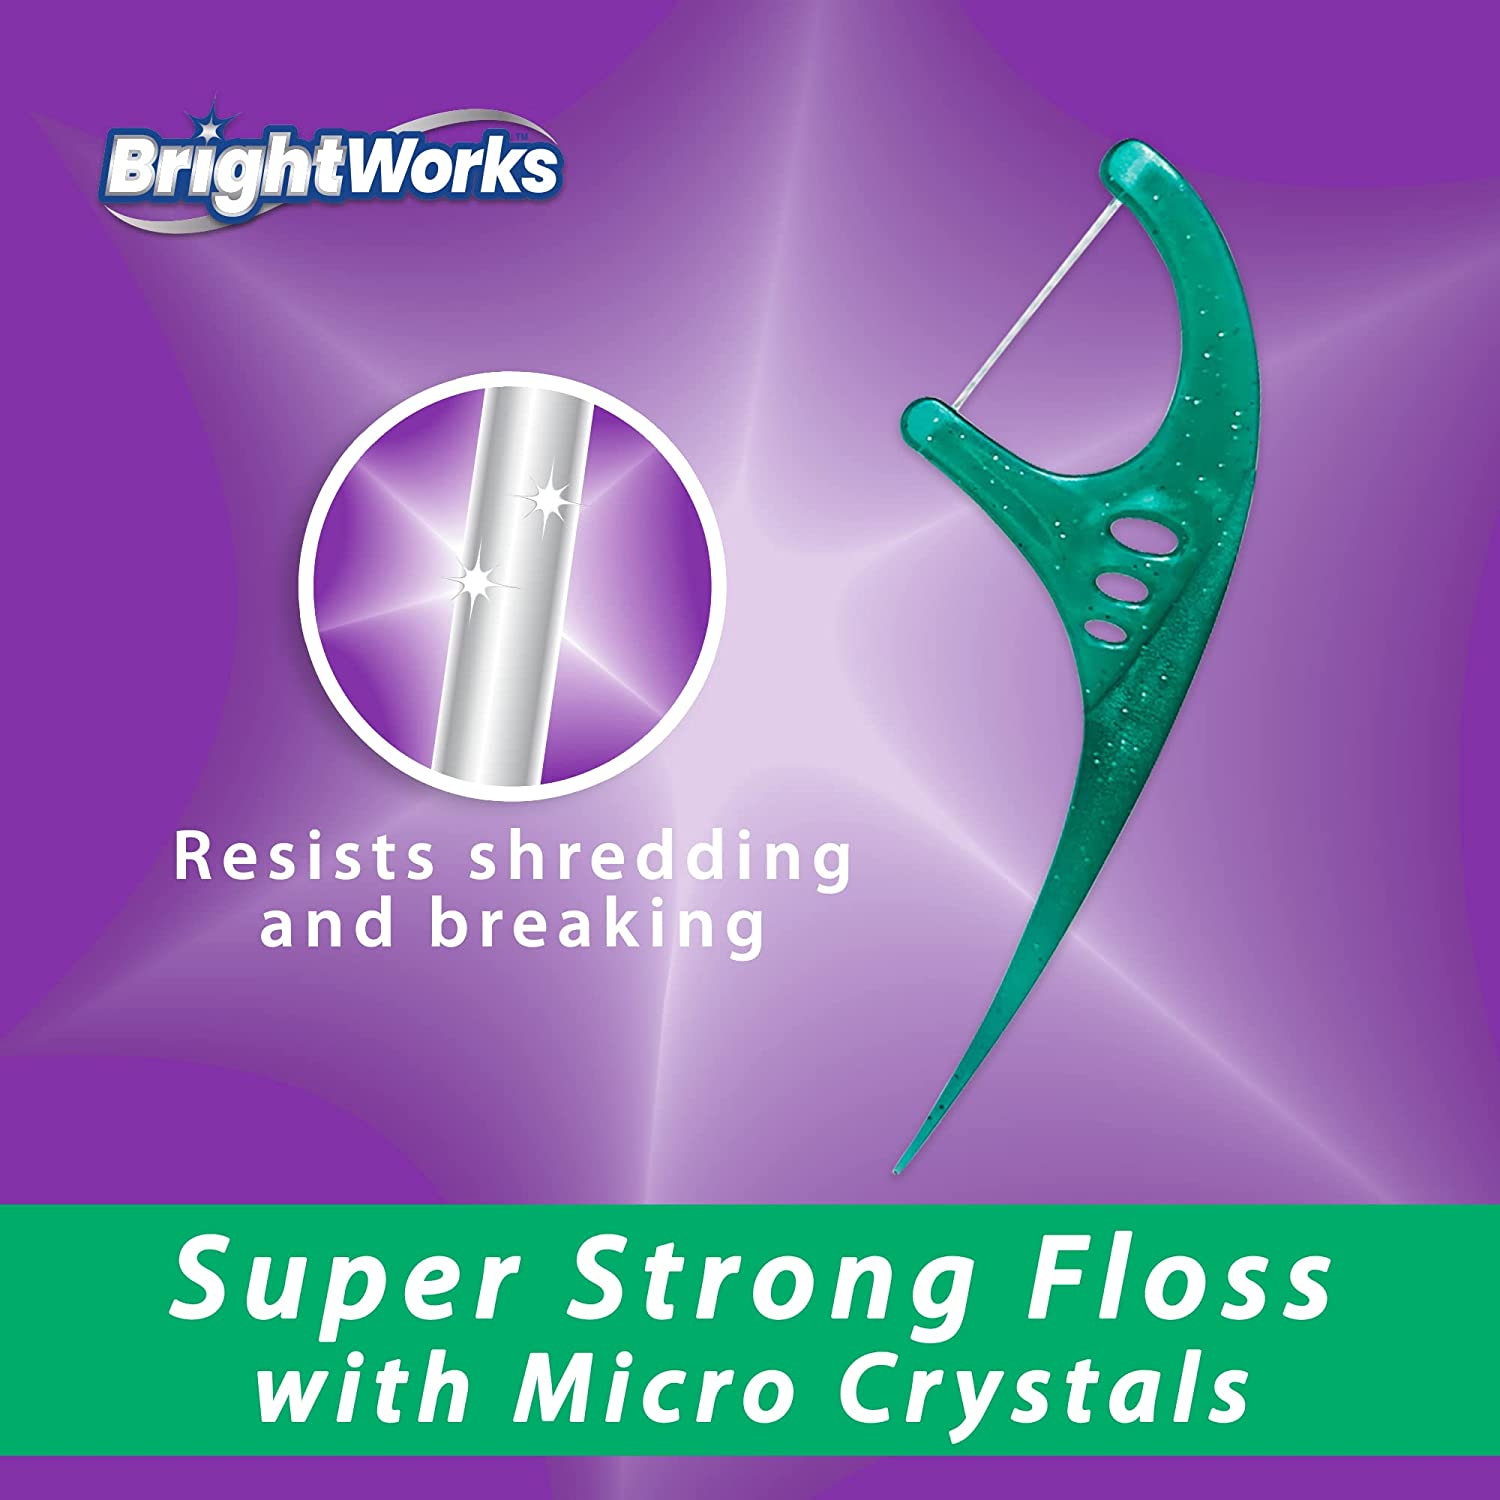 Brightworks Fresh Mint Whitening Dental Flossers - 270 Count